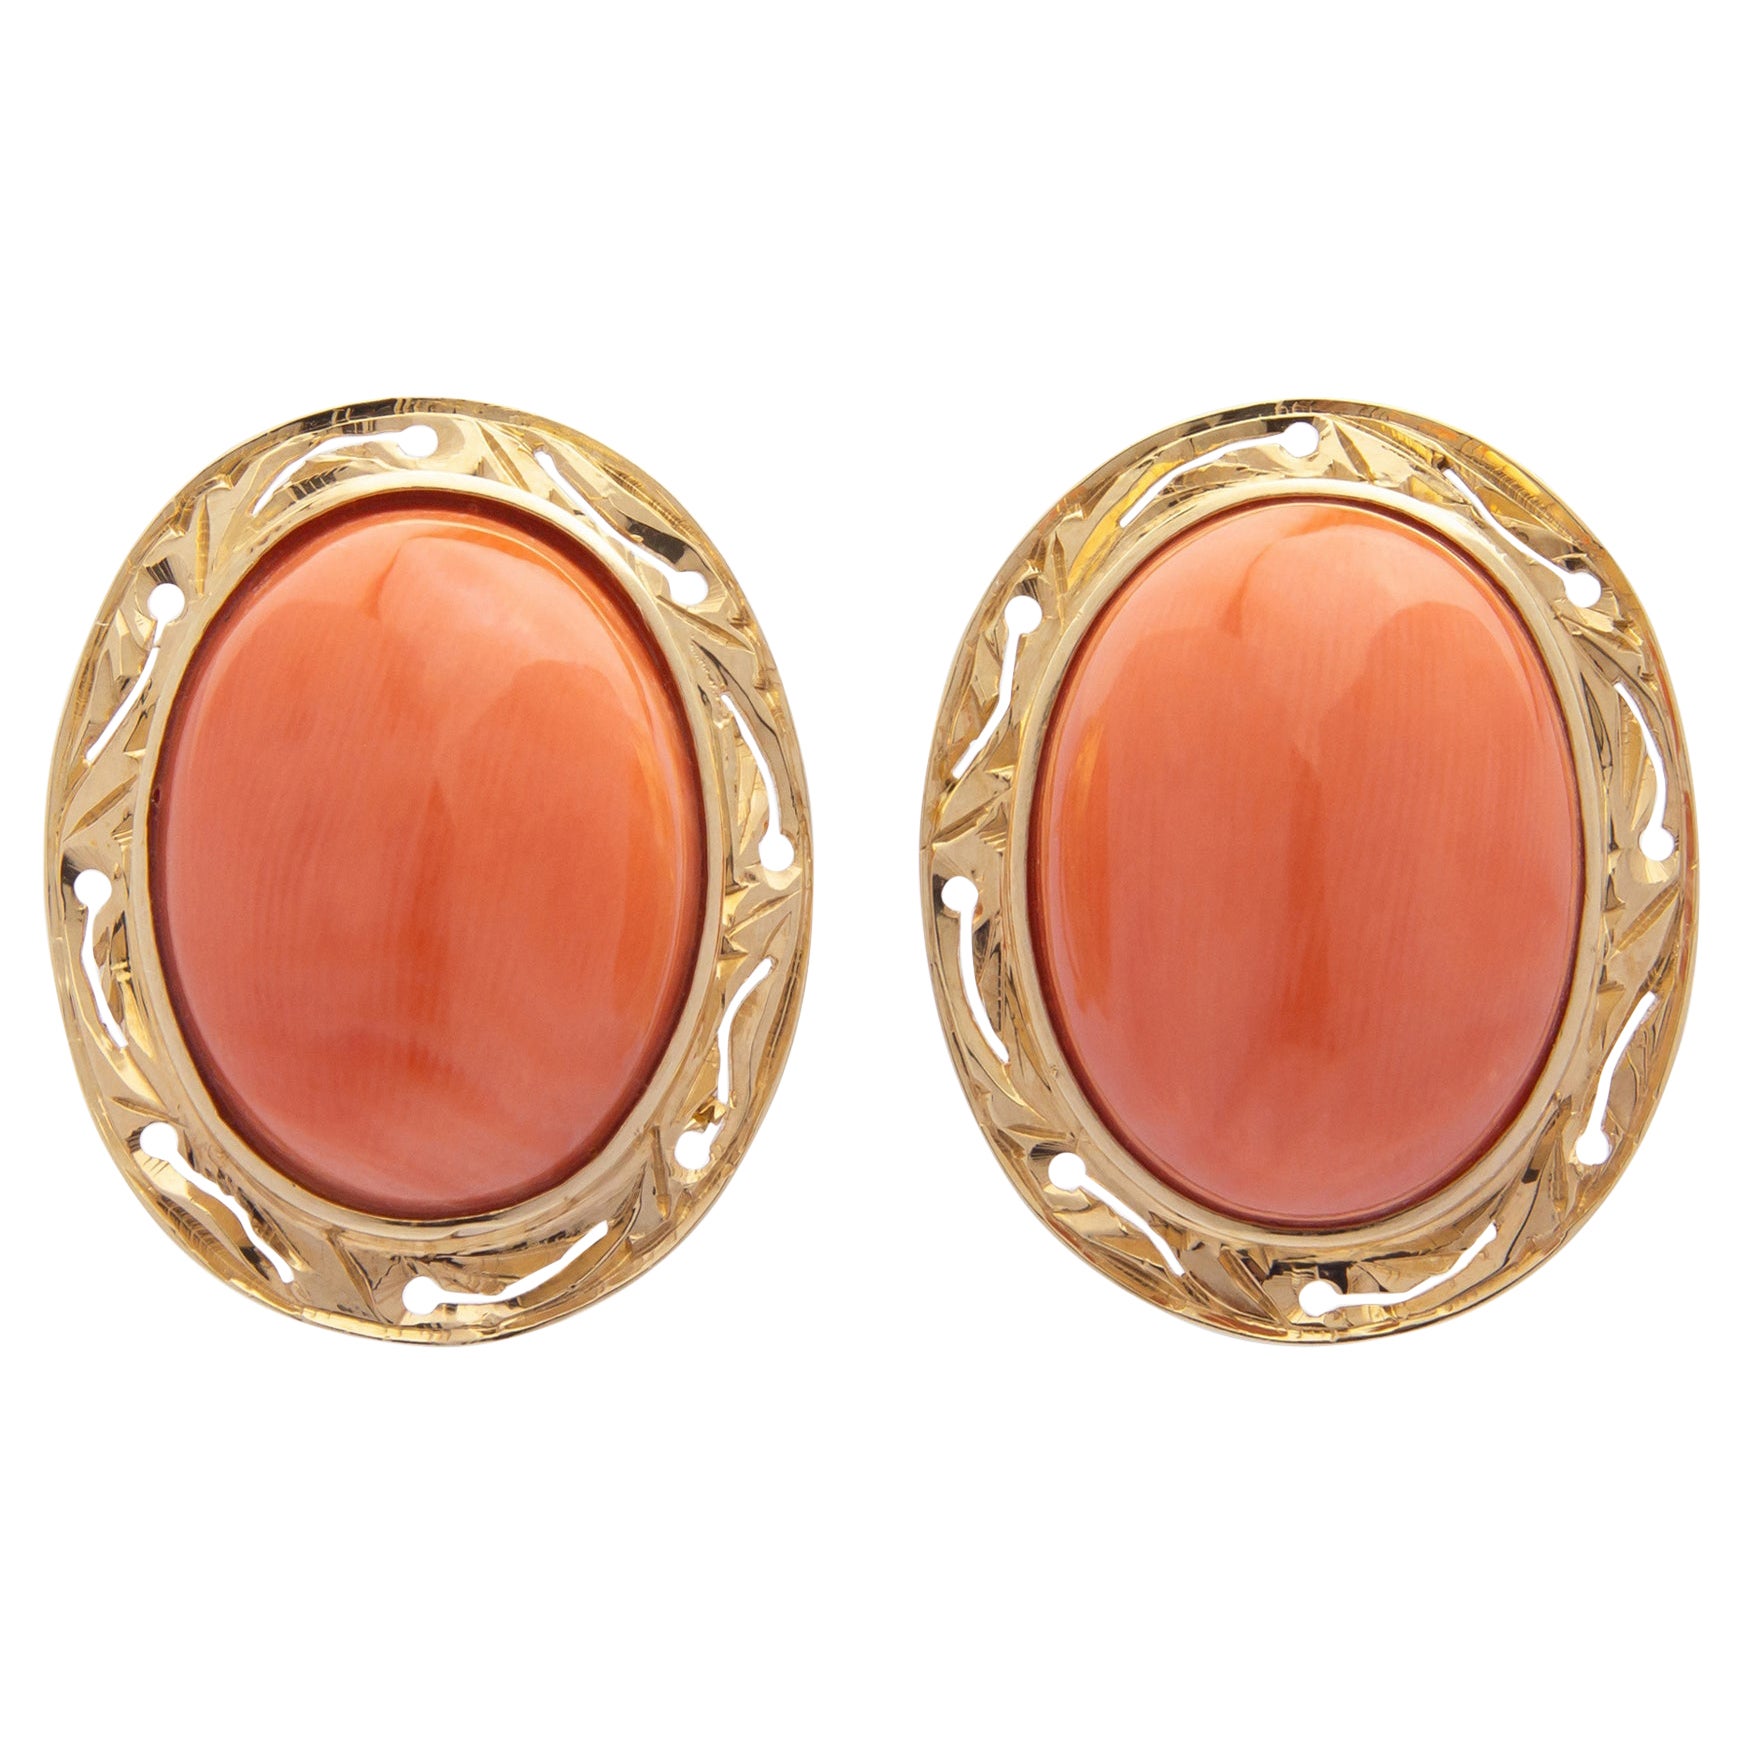 Pair of 14 Karat Gold & Cabochon Coral Earrings For Sale